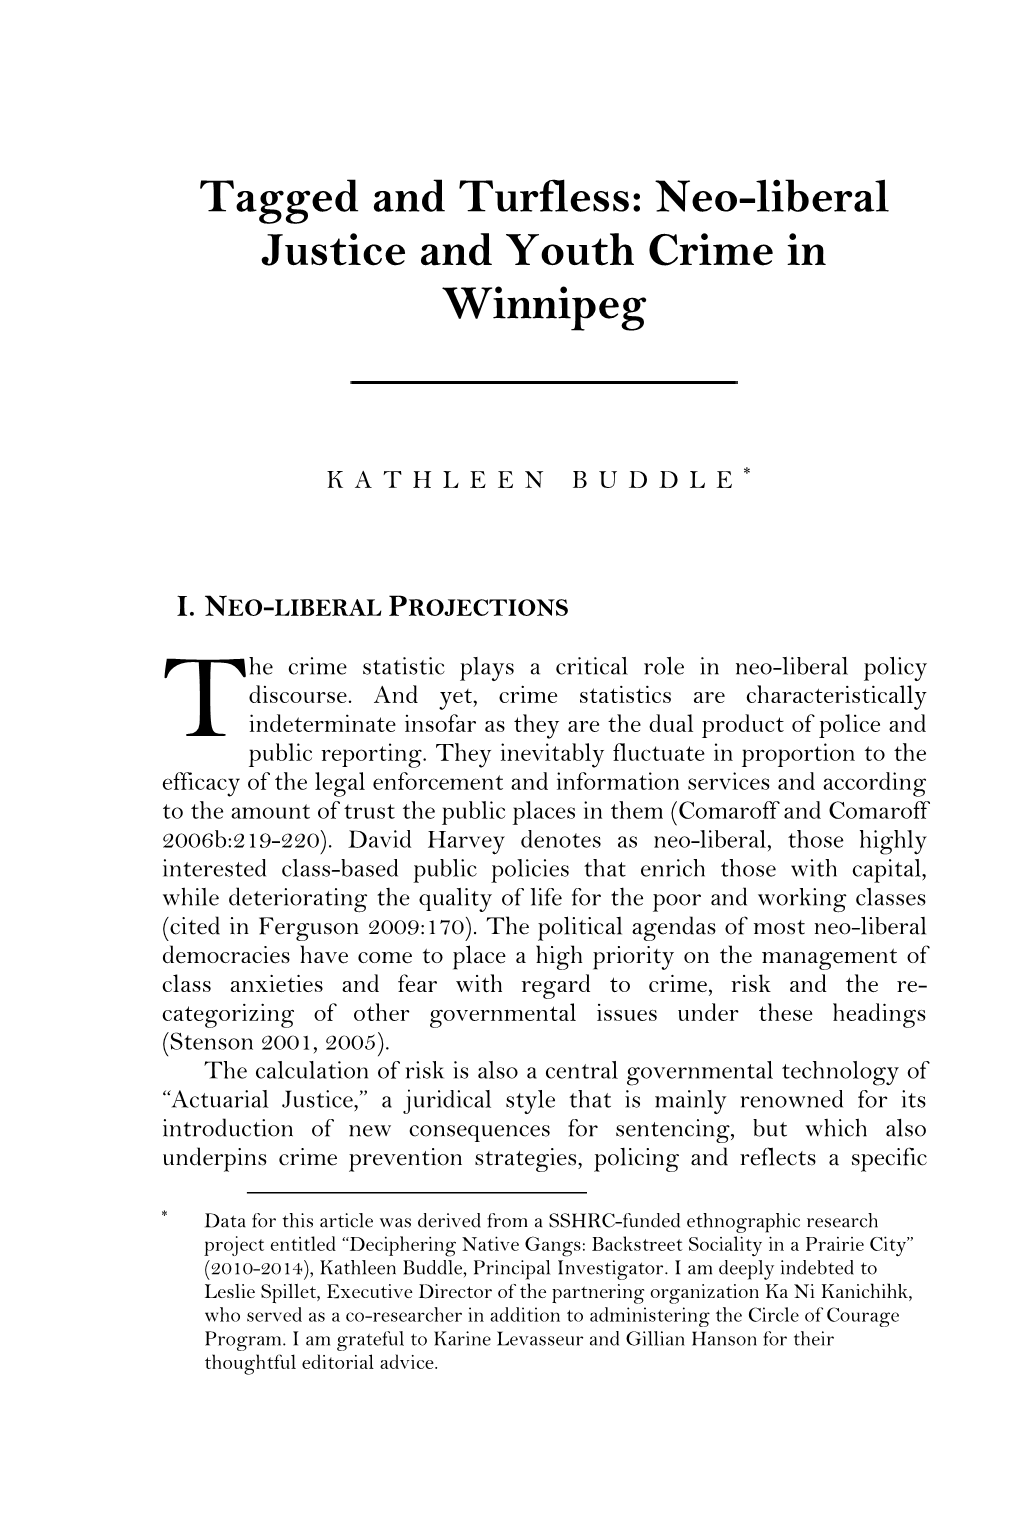 Tagged and Turfless: Neo-Liberal Justice and Youth Crime in Winnipeg